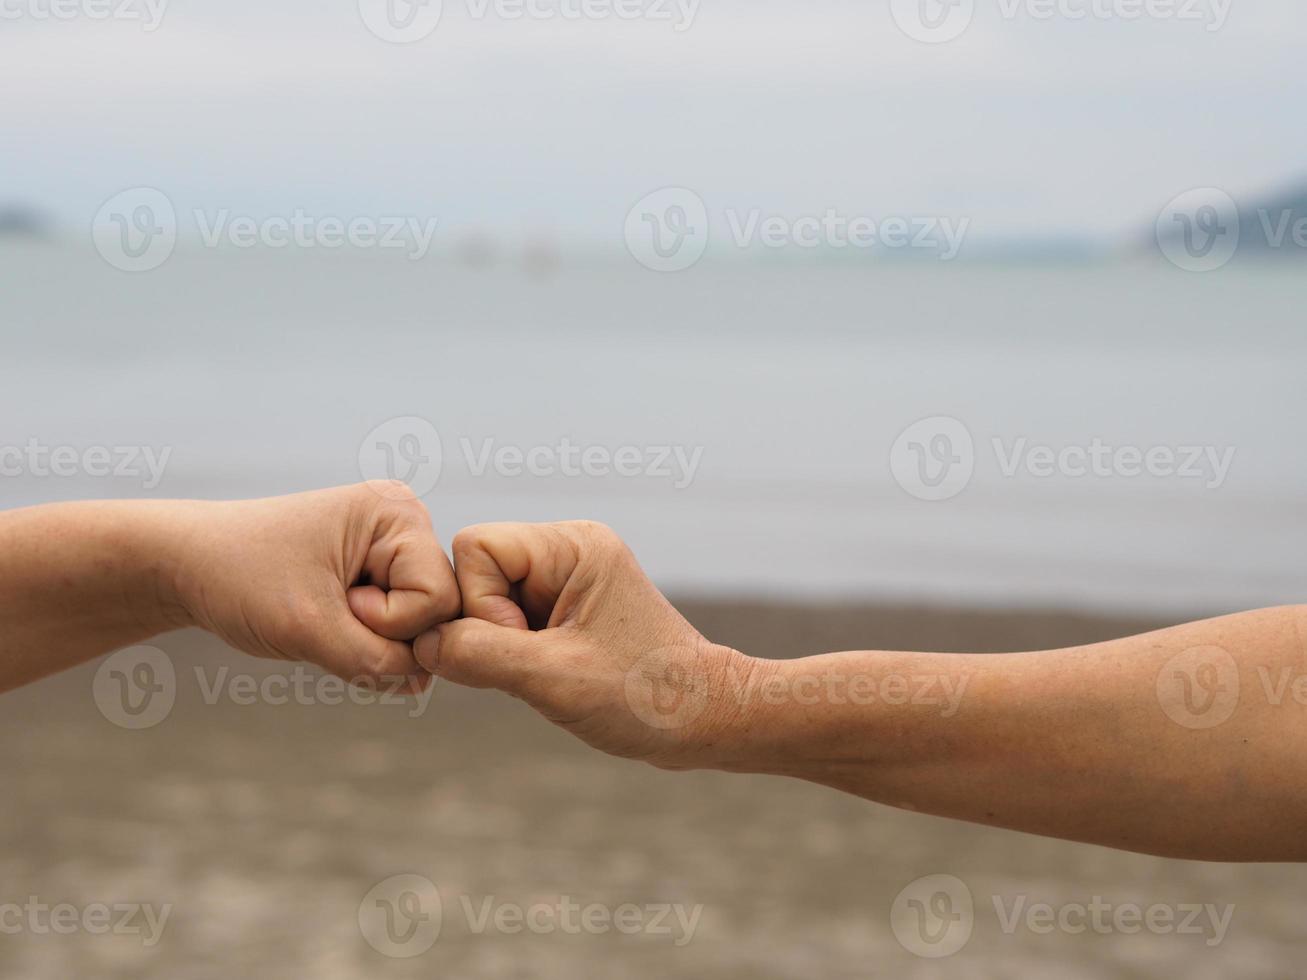 Two woman Alternative handshakes fist clenched hand greeting in the situation of an epidemic covid 19, coronavirus new normal social distancing photo